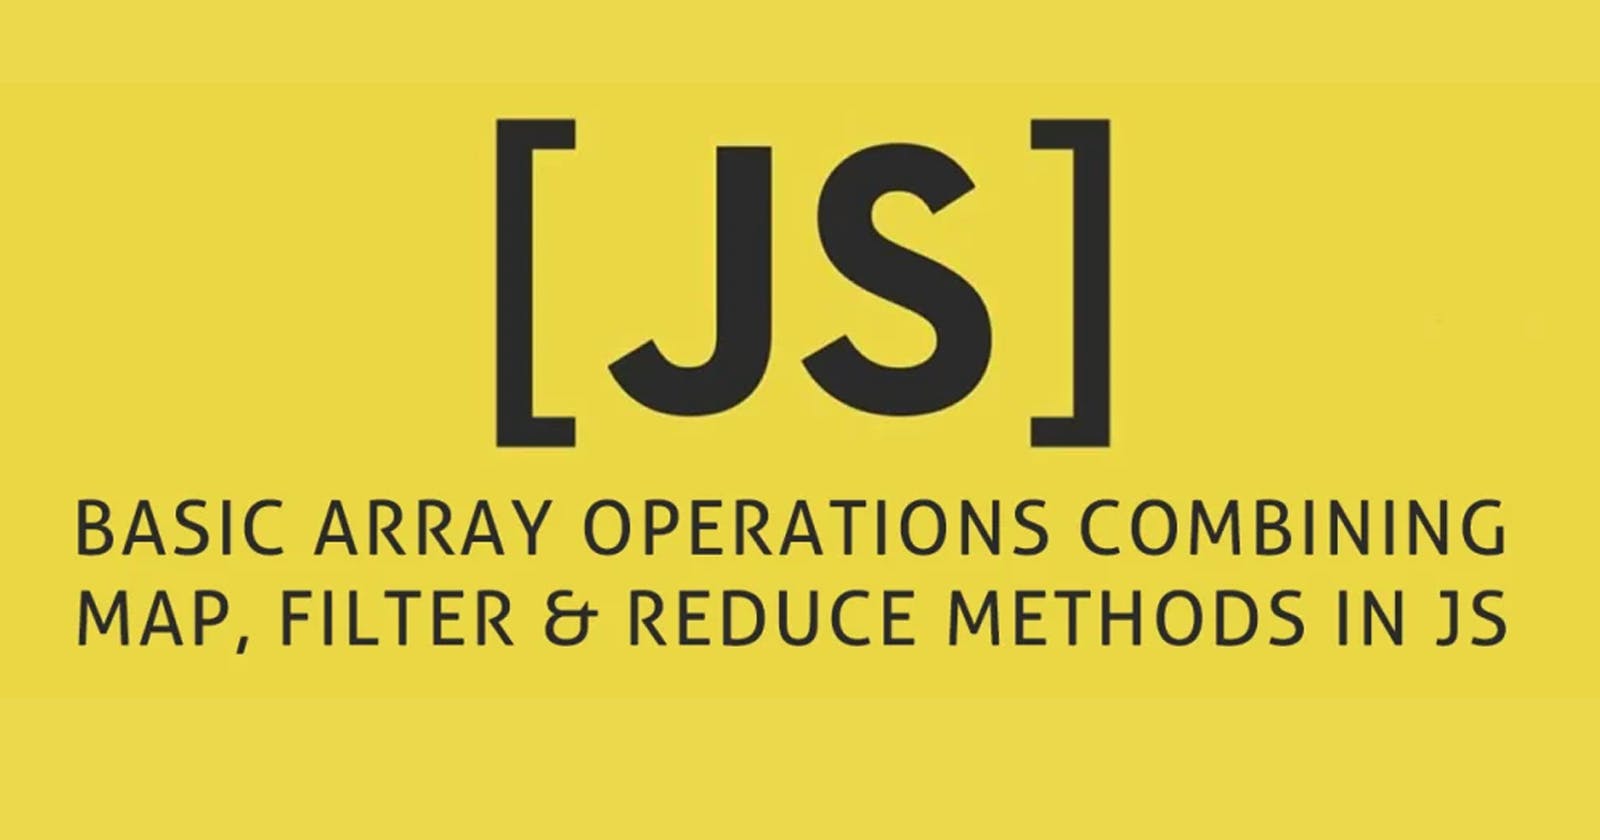 Basic array operations combining Map, Filter & Reduce in JavaScript